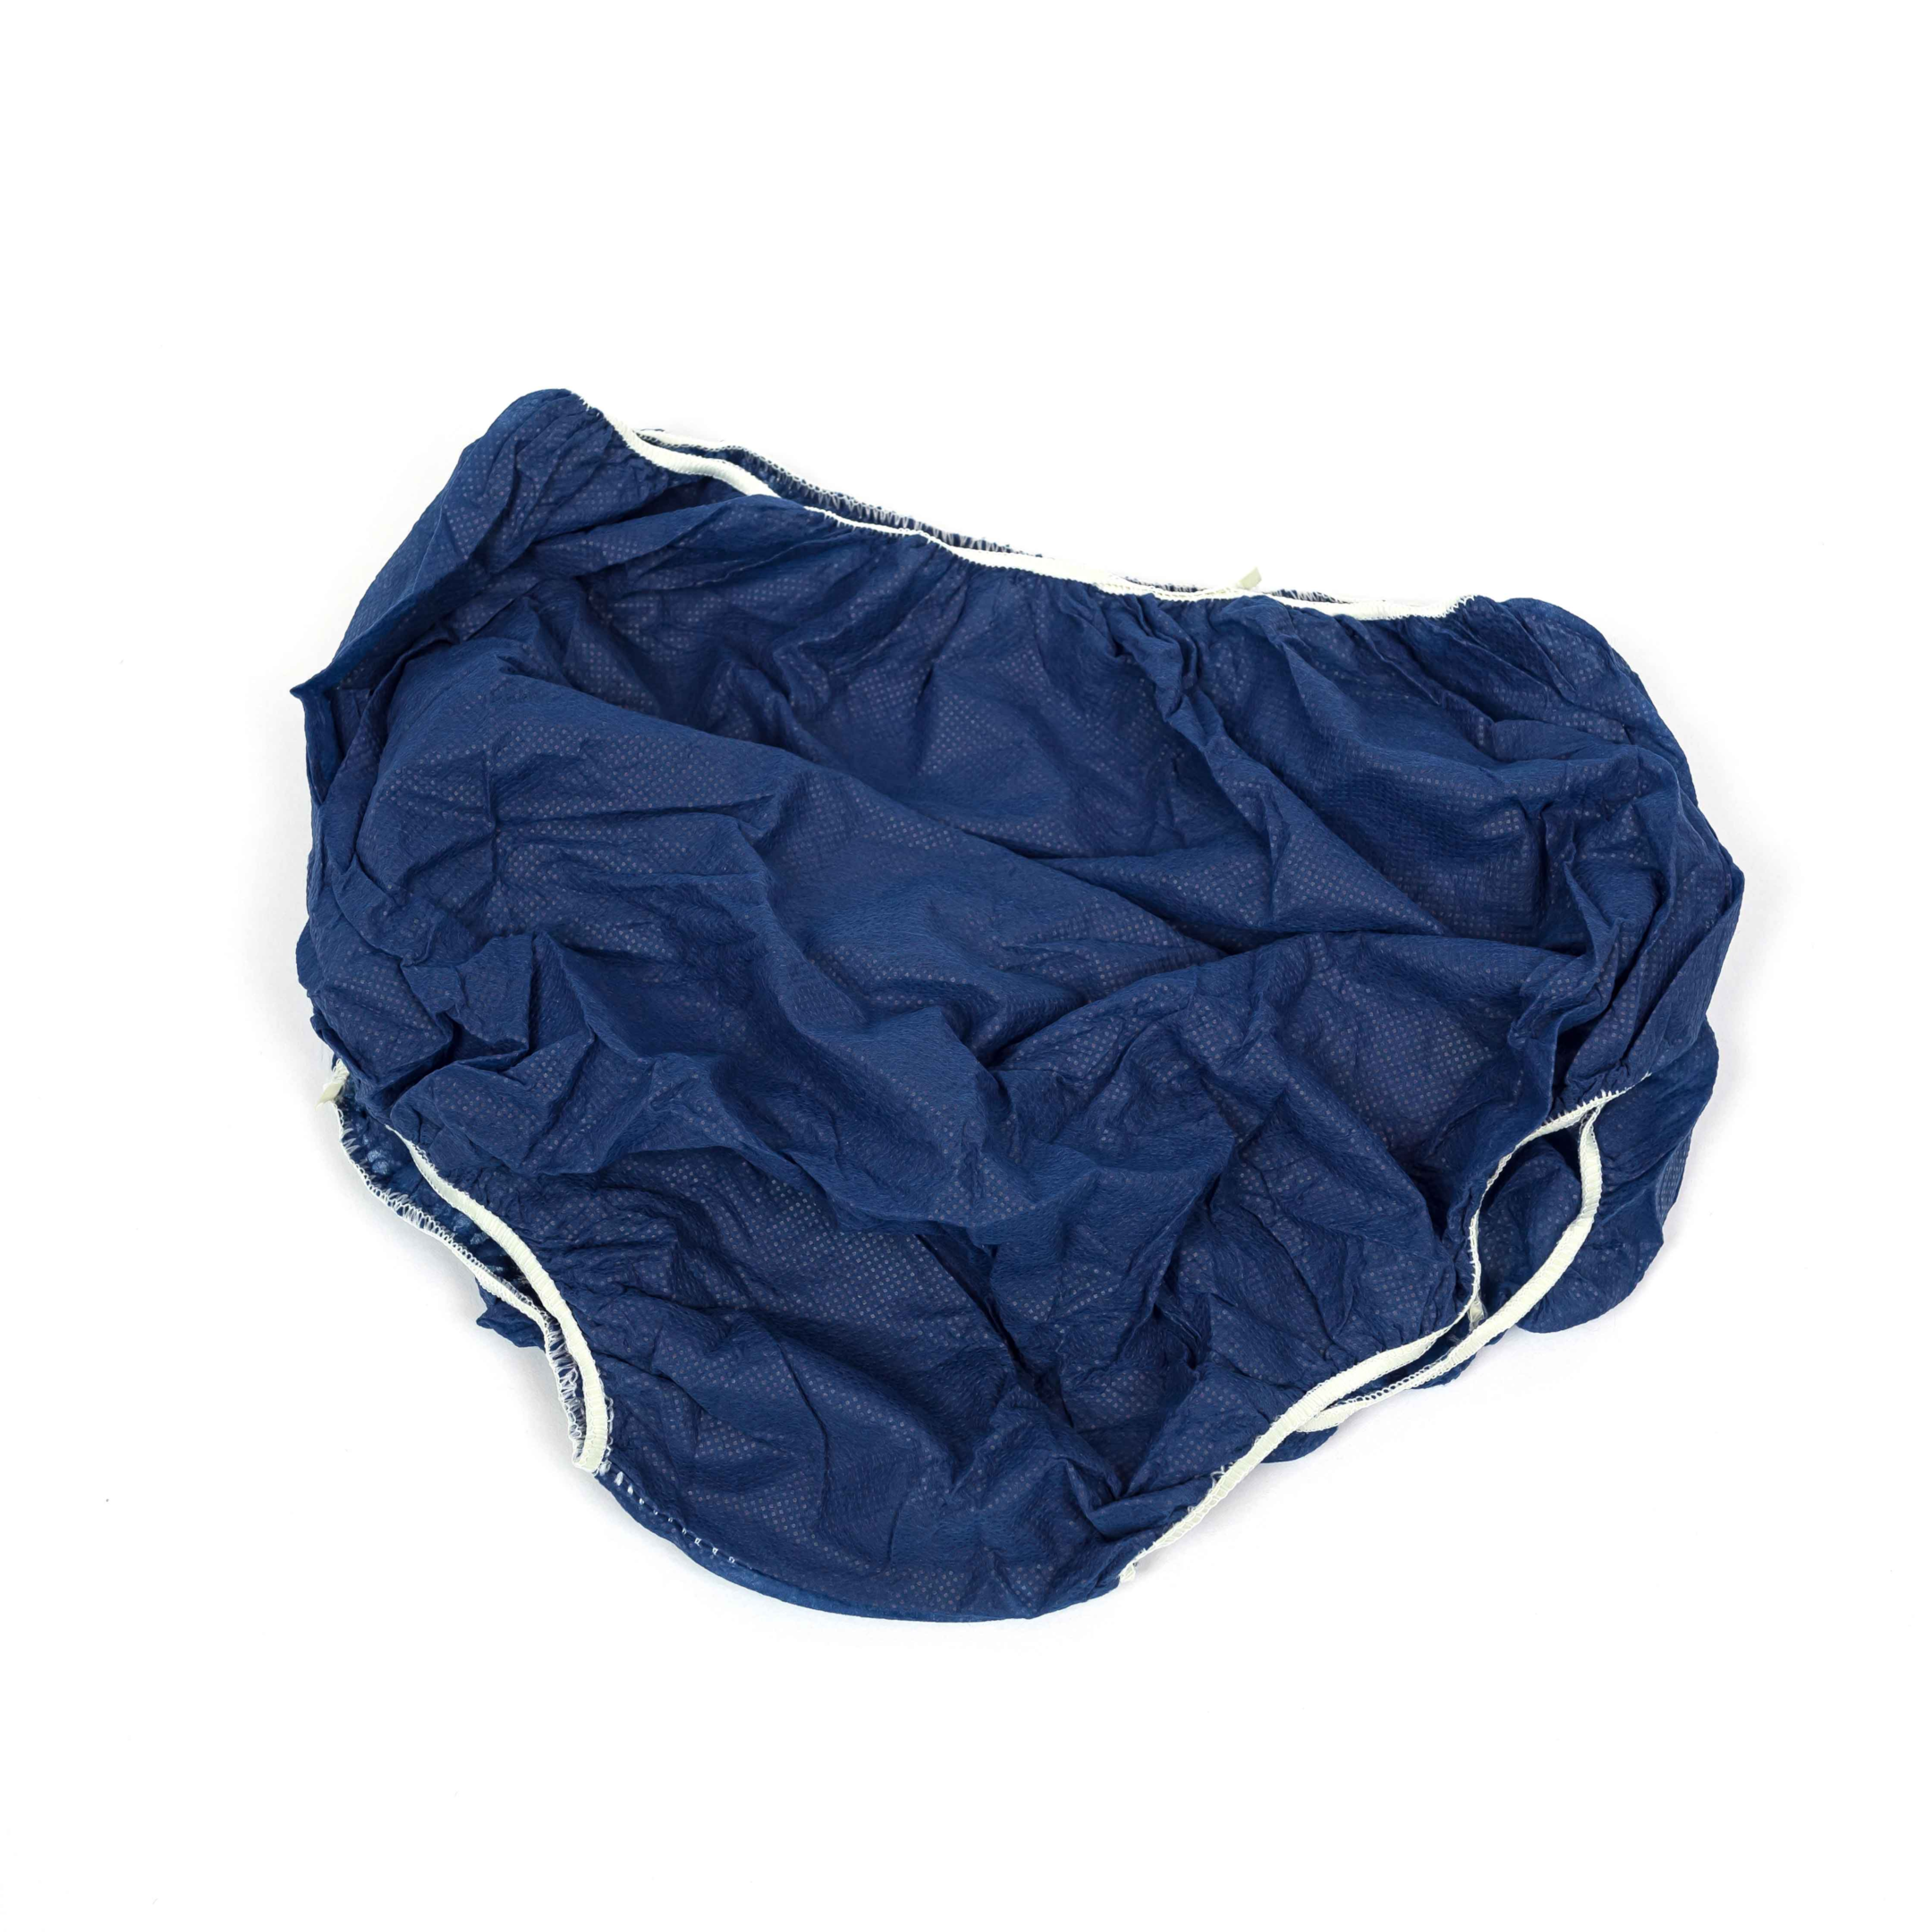 Discover the Benefits of Postpartum Underwear: Comfort & Recovery After  Birth